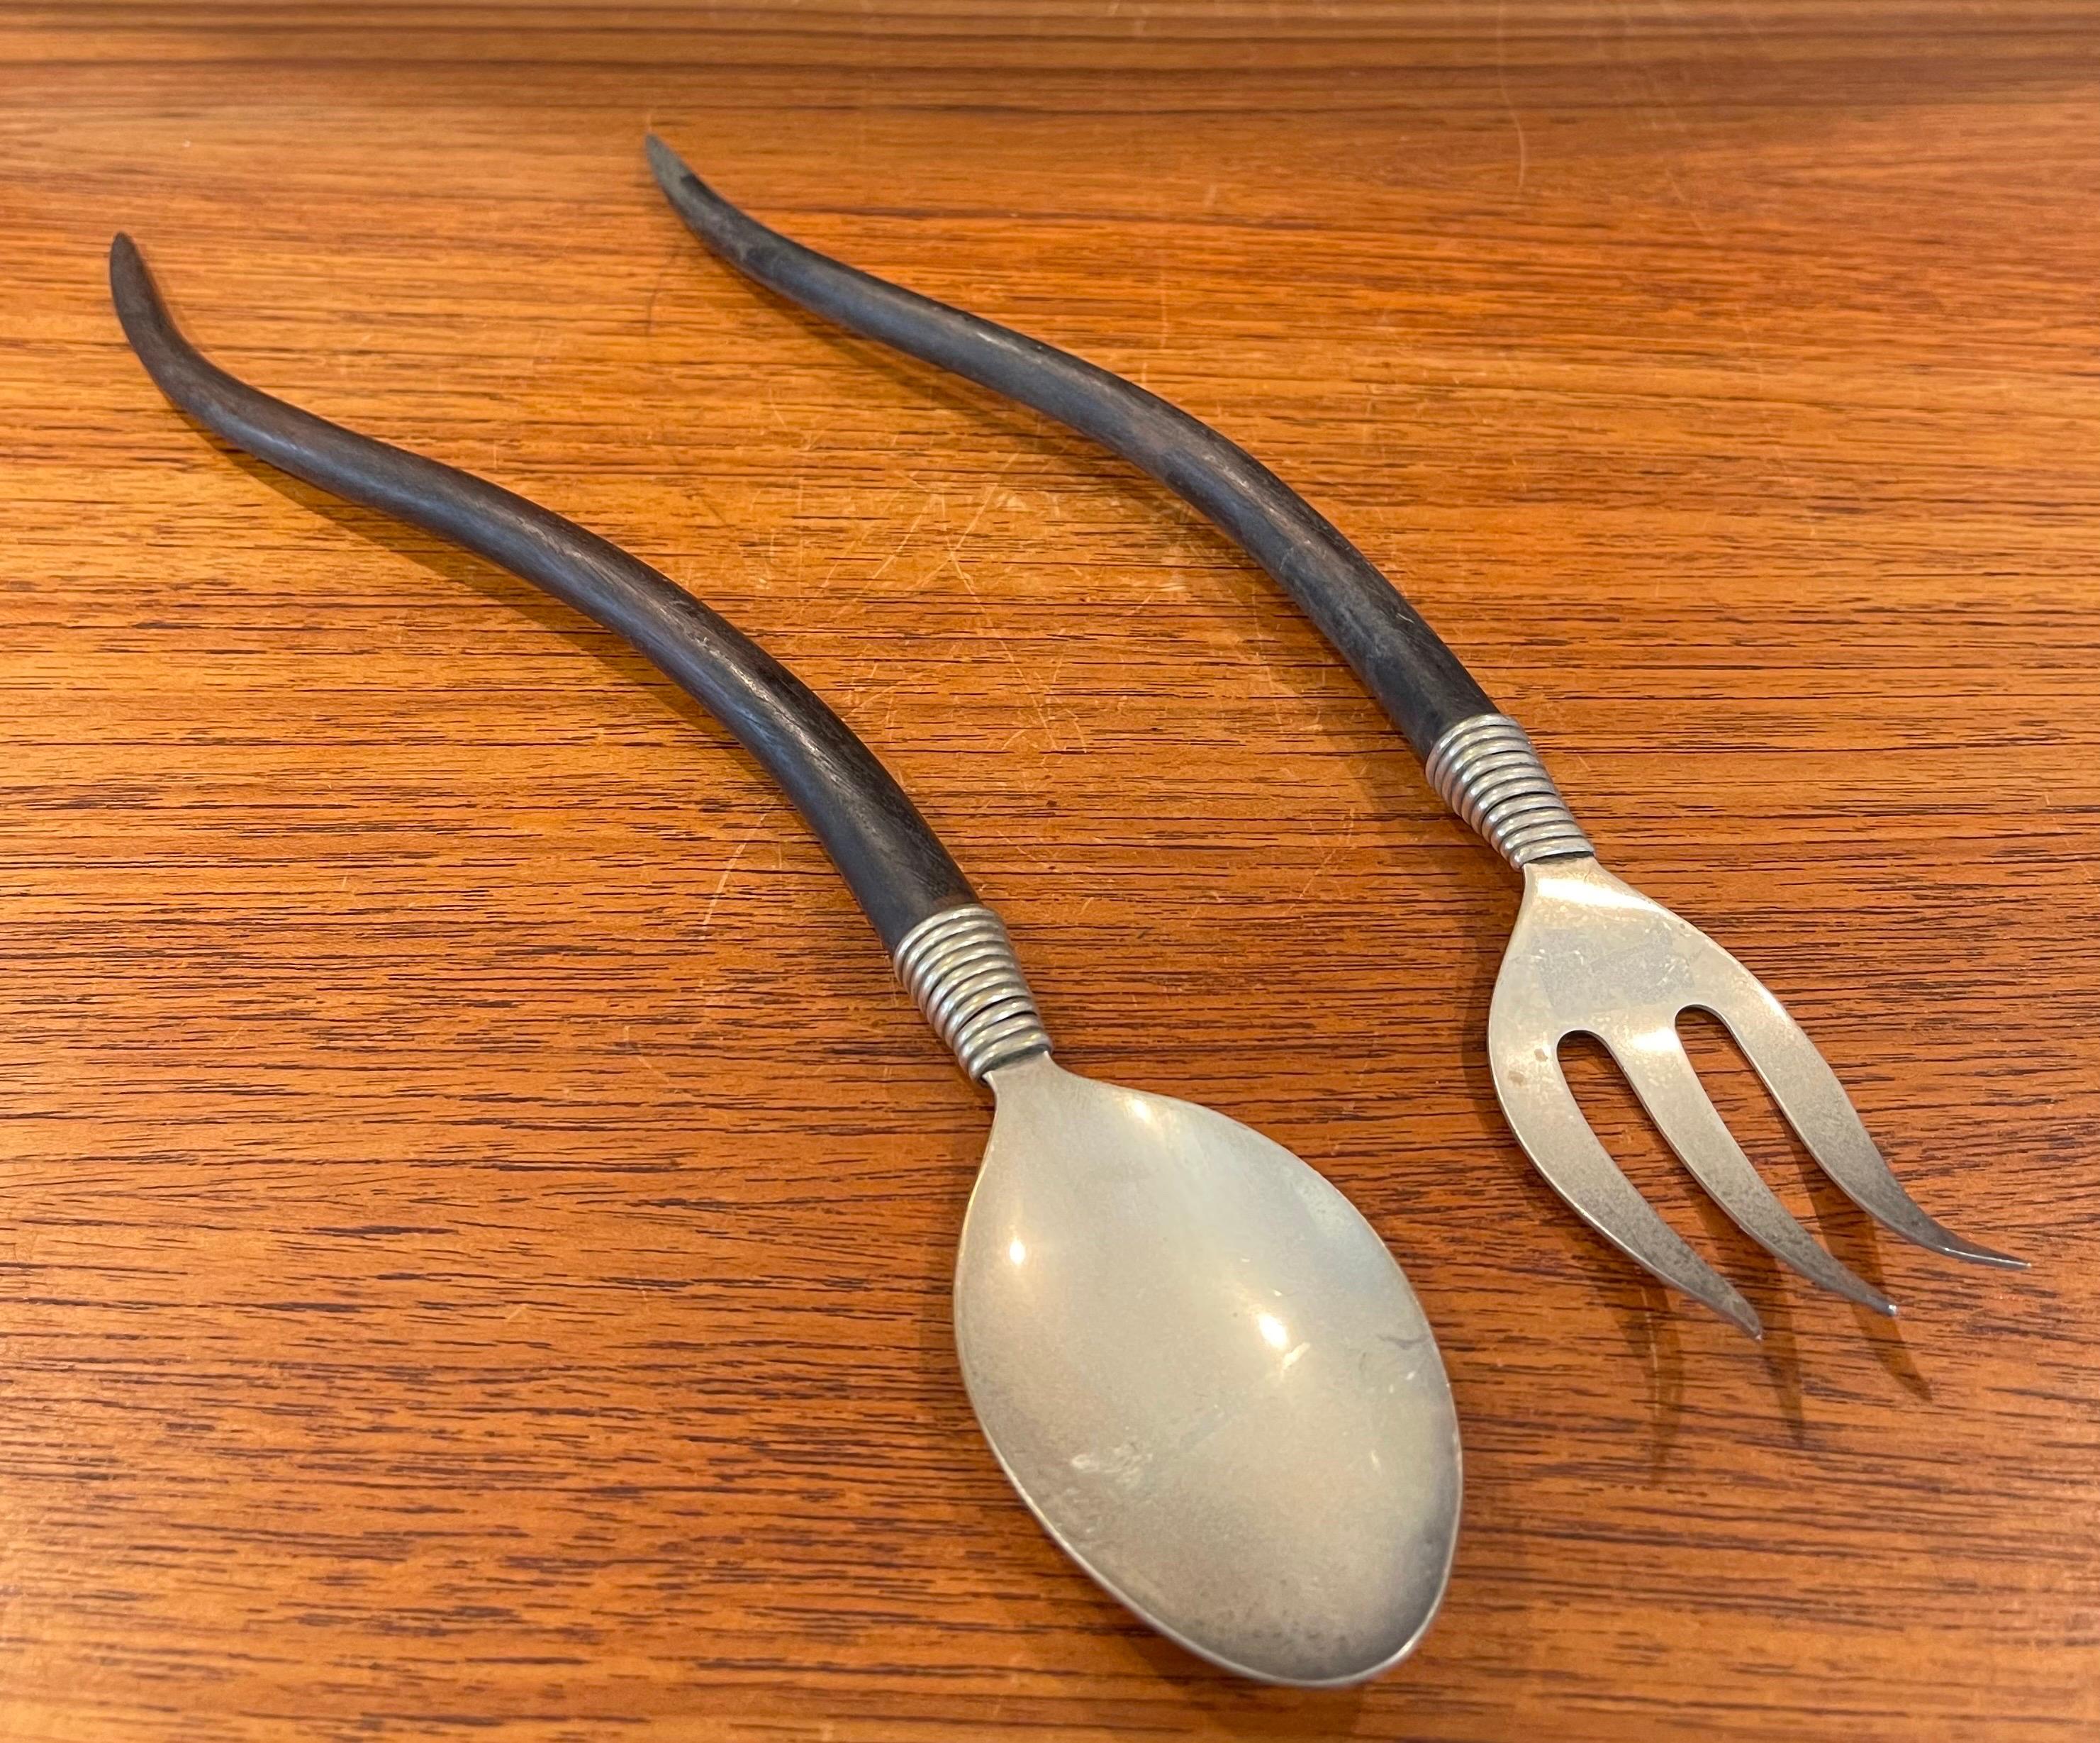 Simple and elegant stylized set of salad servers made of stainless steel and curved wood handles, circa 1960s. The set is in very good vintage condition and measures 12